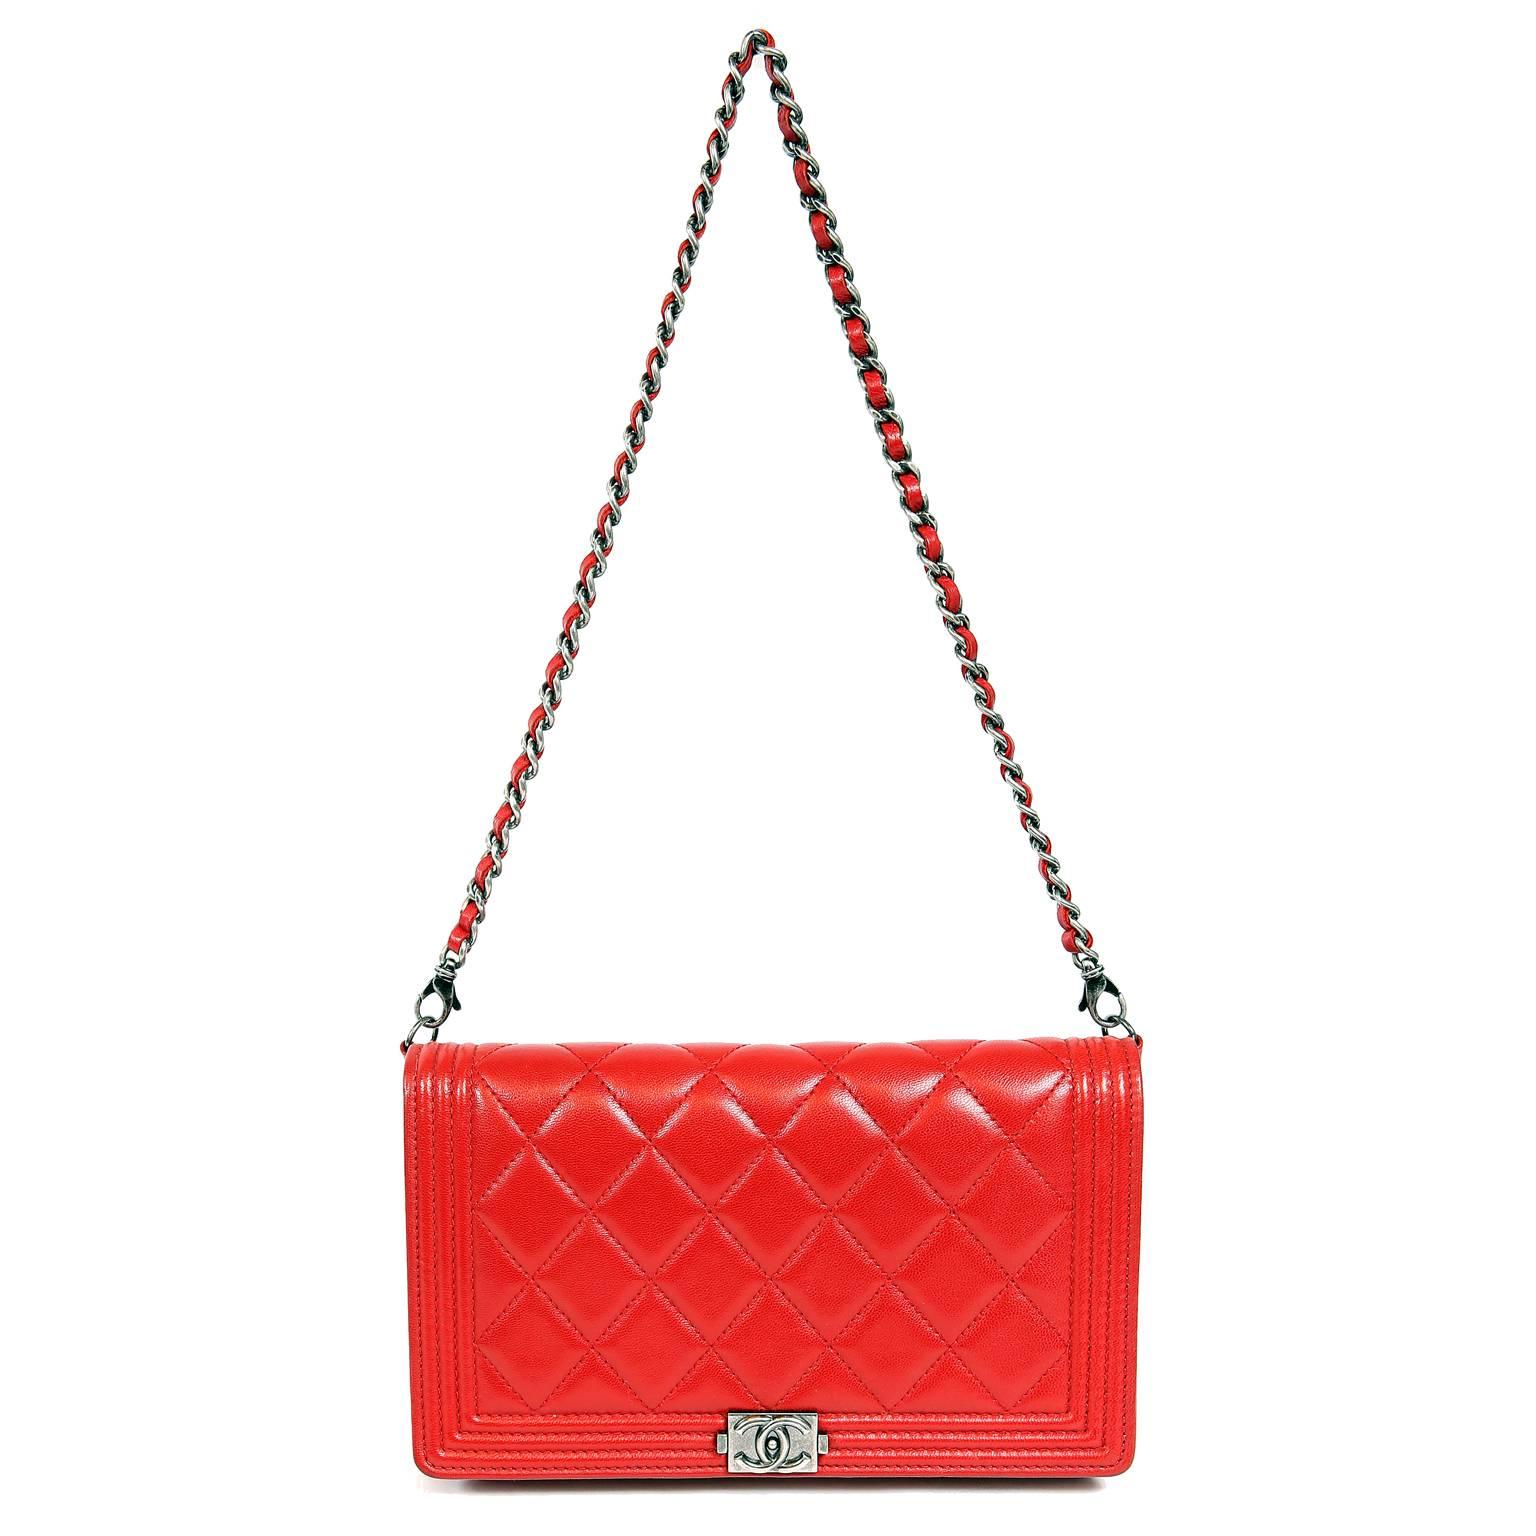 Chanel Red Leather Boy Bag Clutch with Chain 10